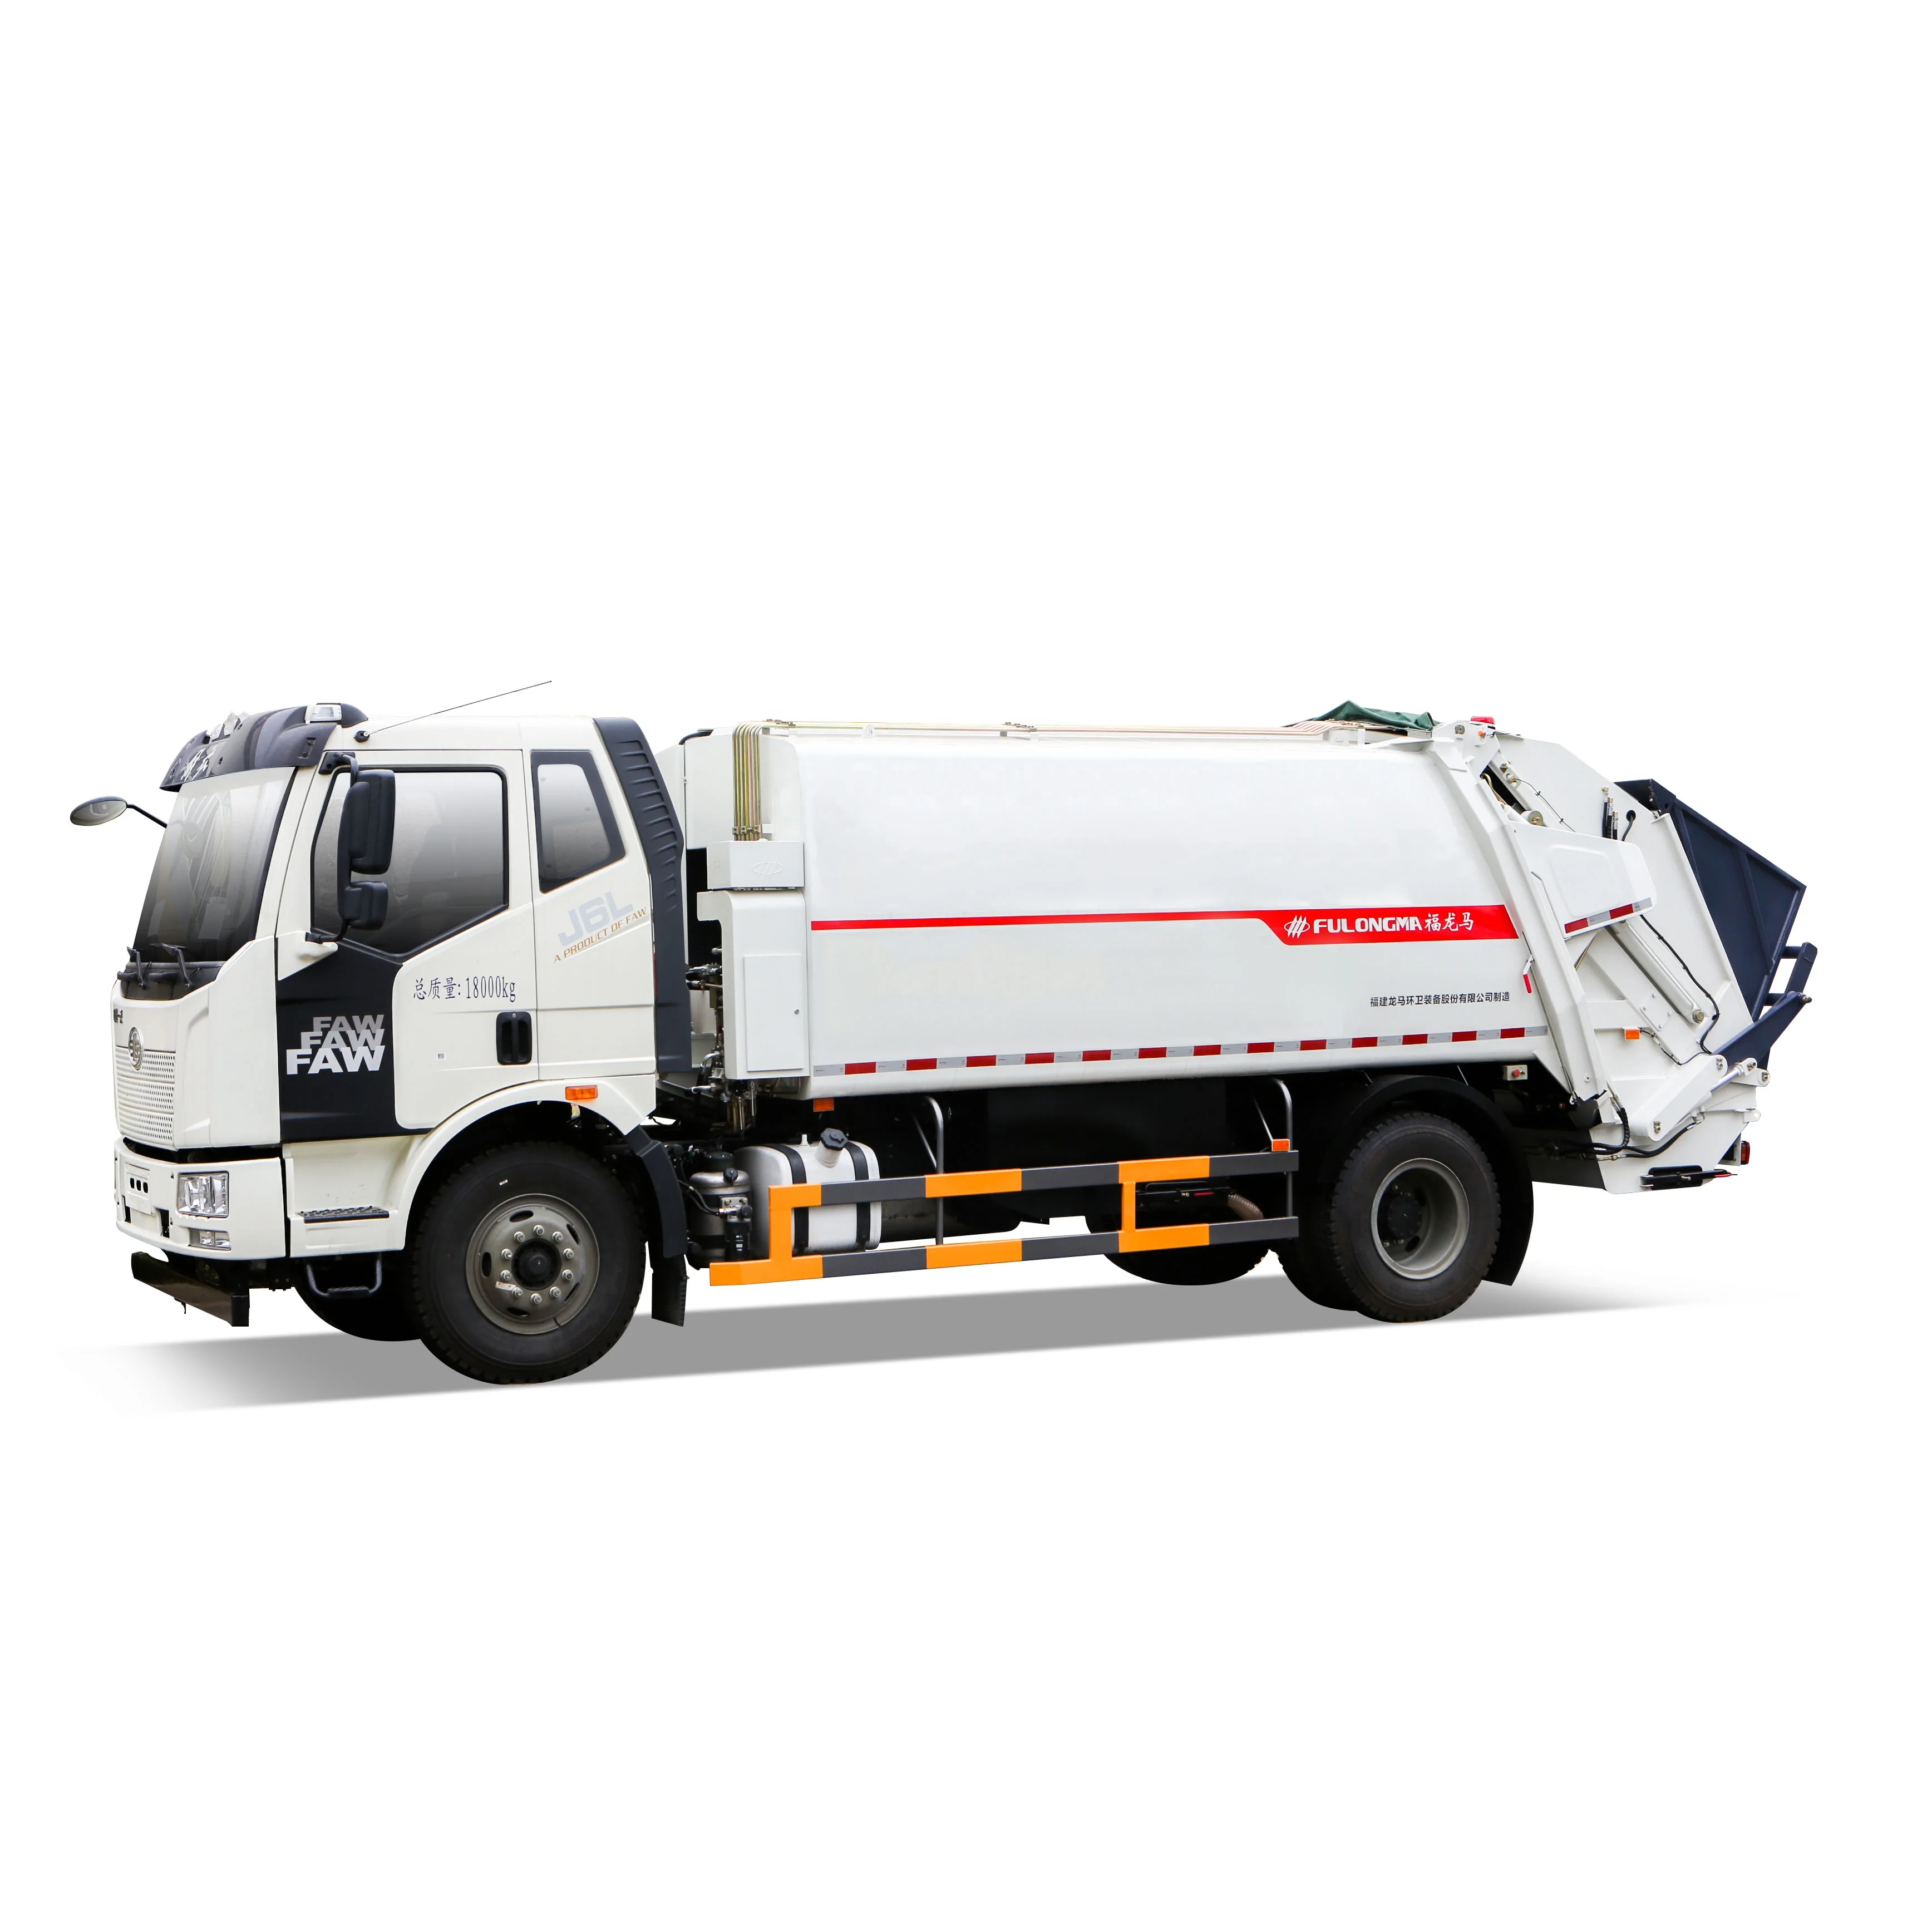 
FULONGMA 18 ton garbage compression truck with bin lifter garbage vehicle  (1600122413329)